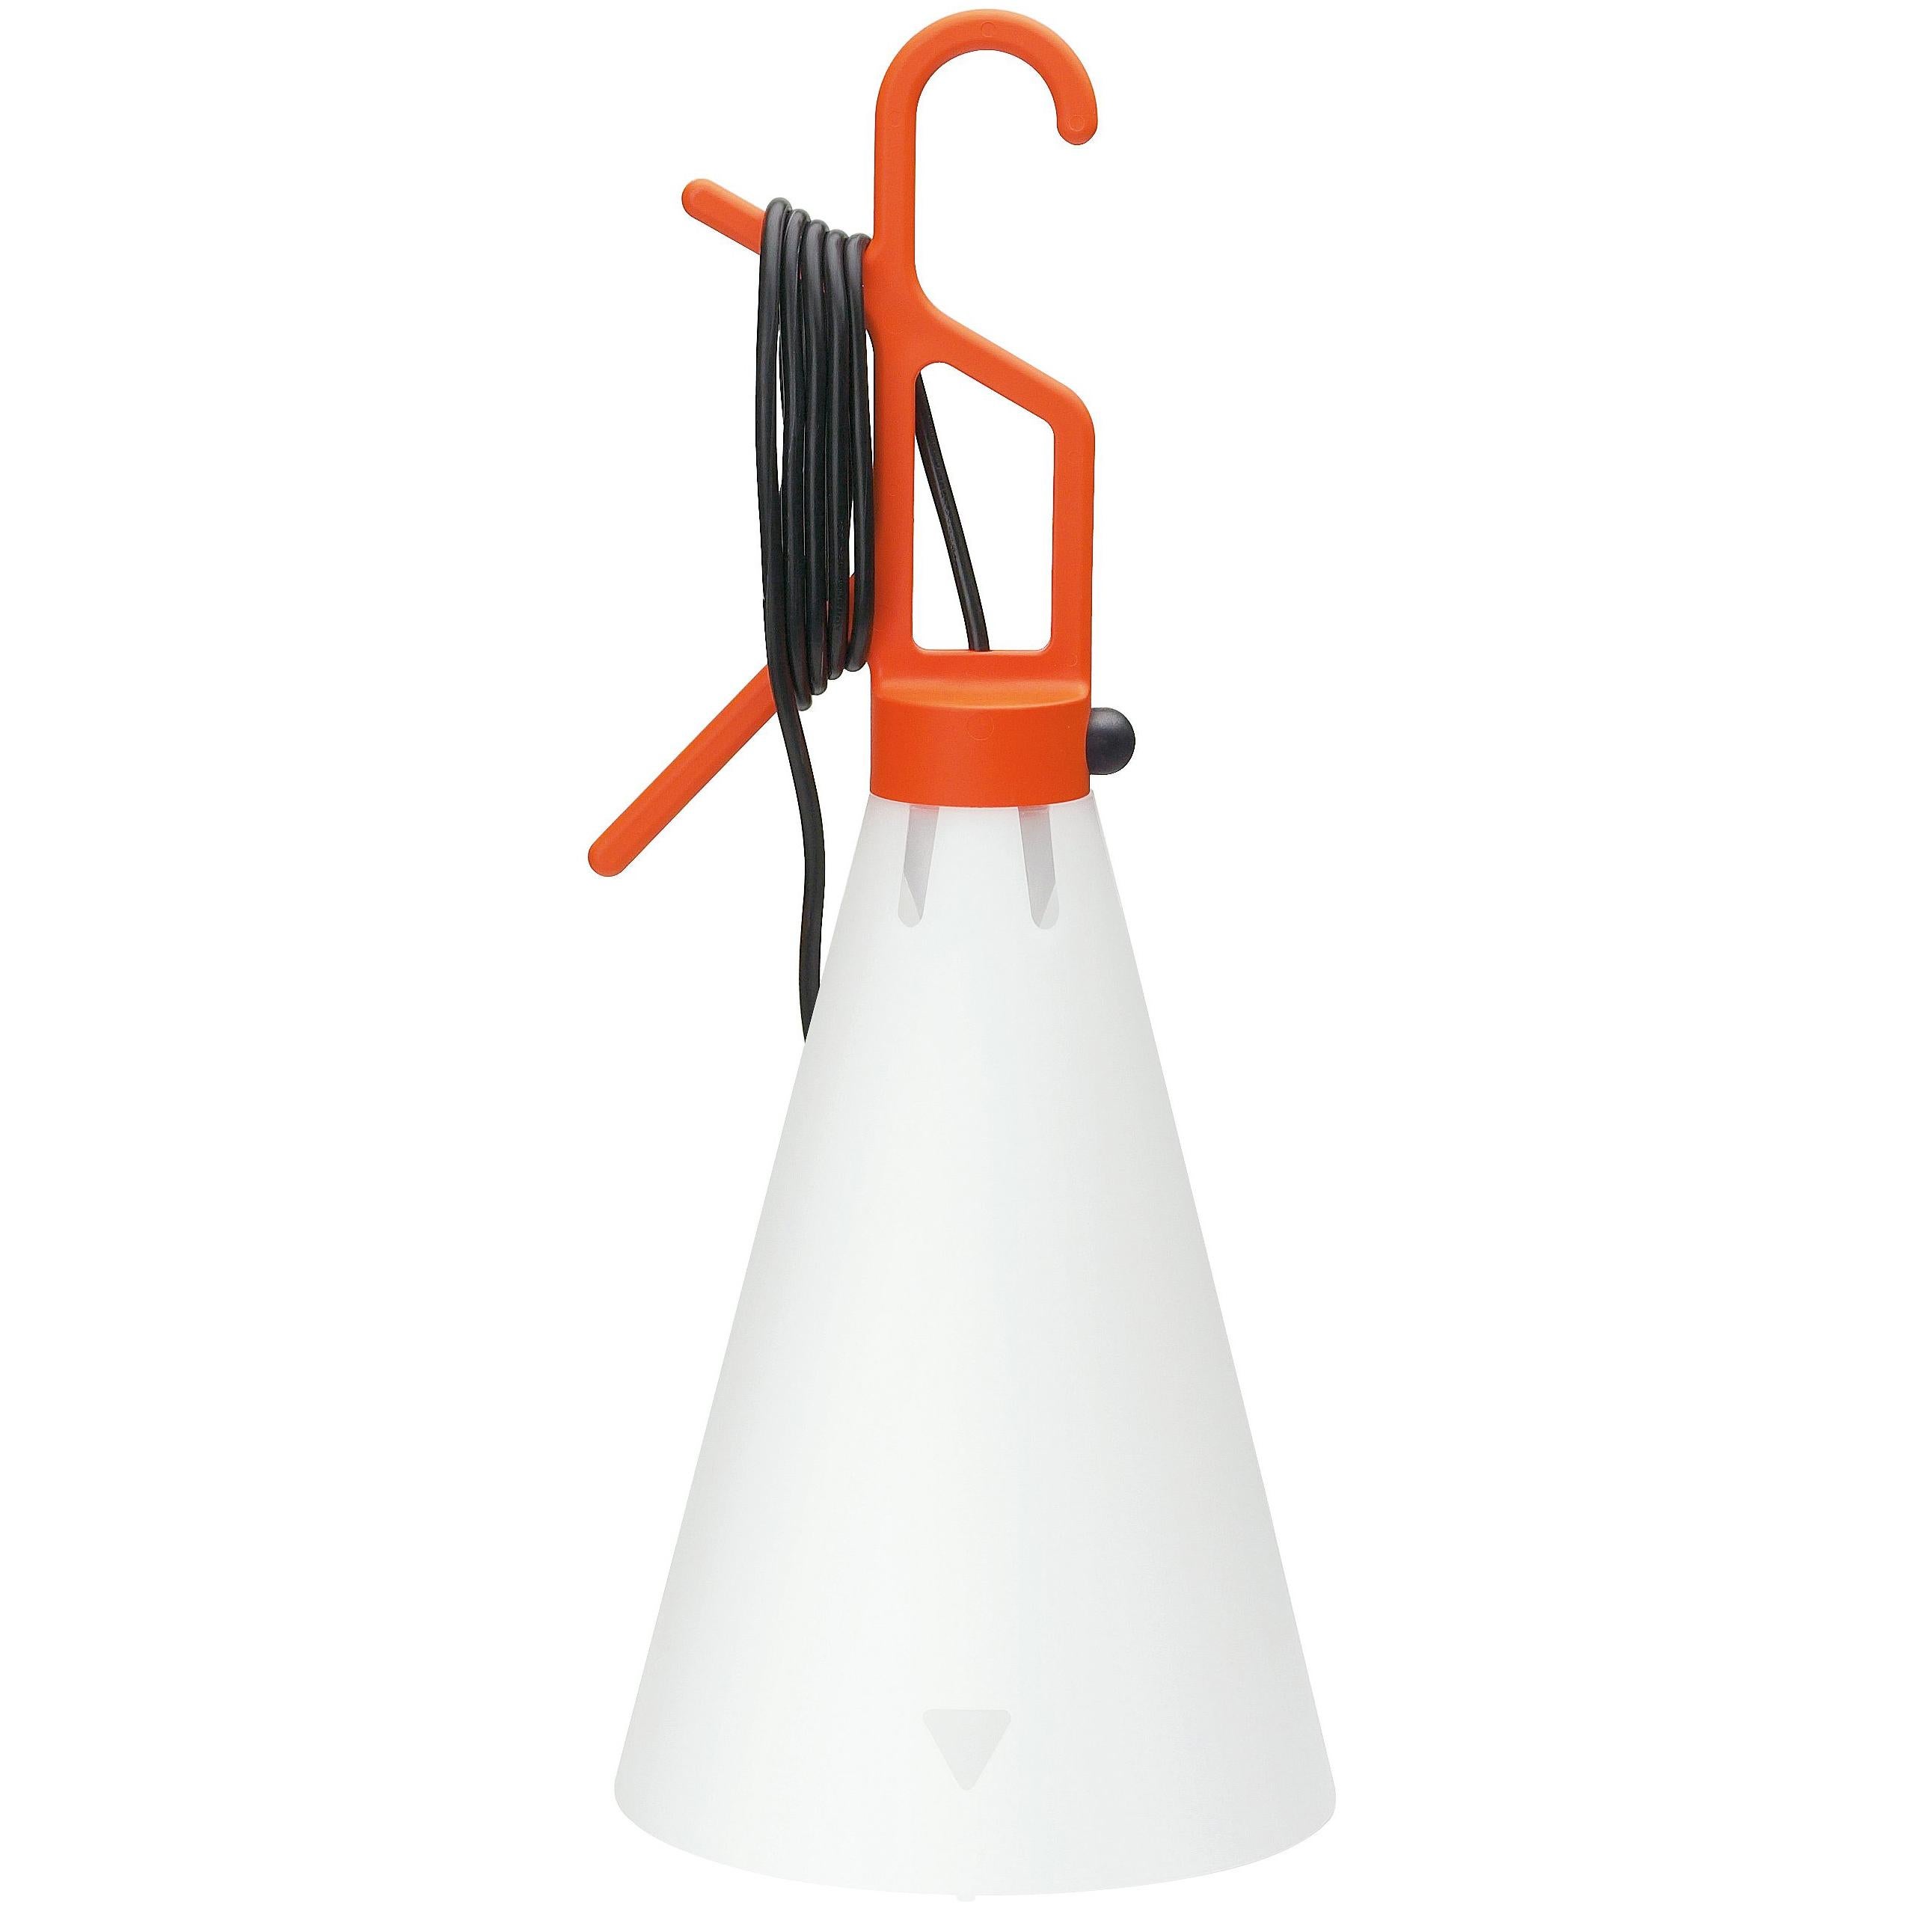 FLOS May Day Table Lamp in Orange by Konstantin Grcic For Sale